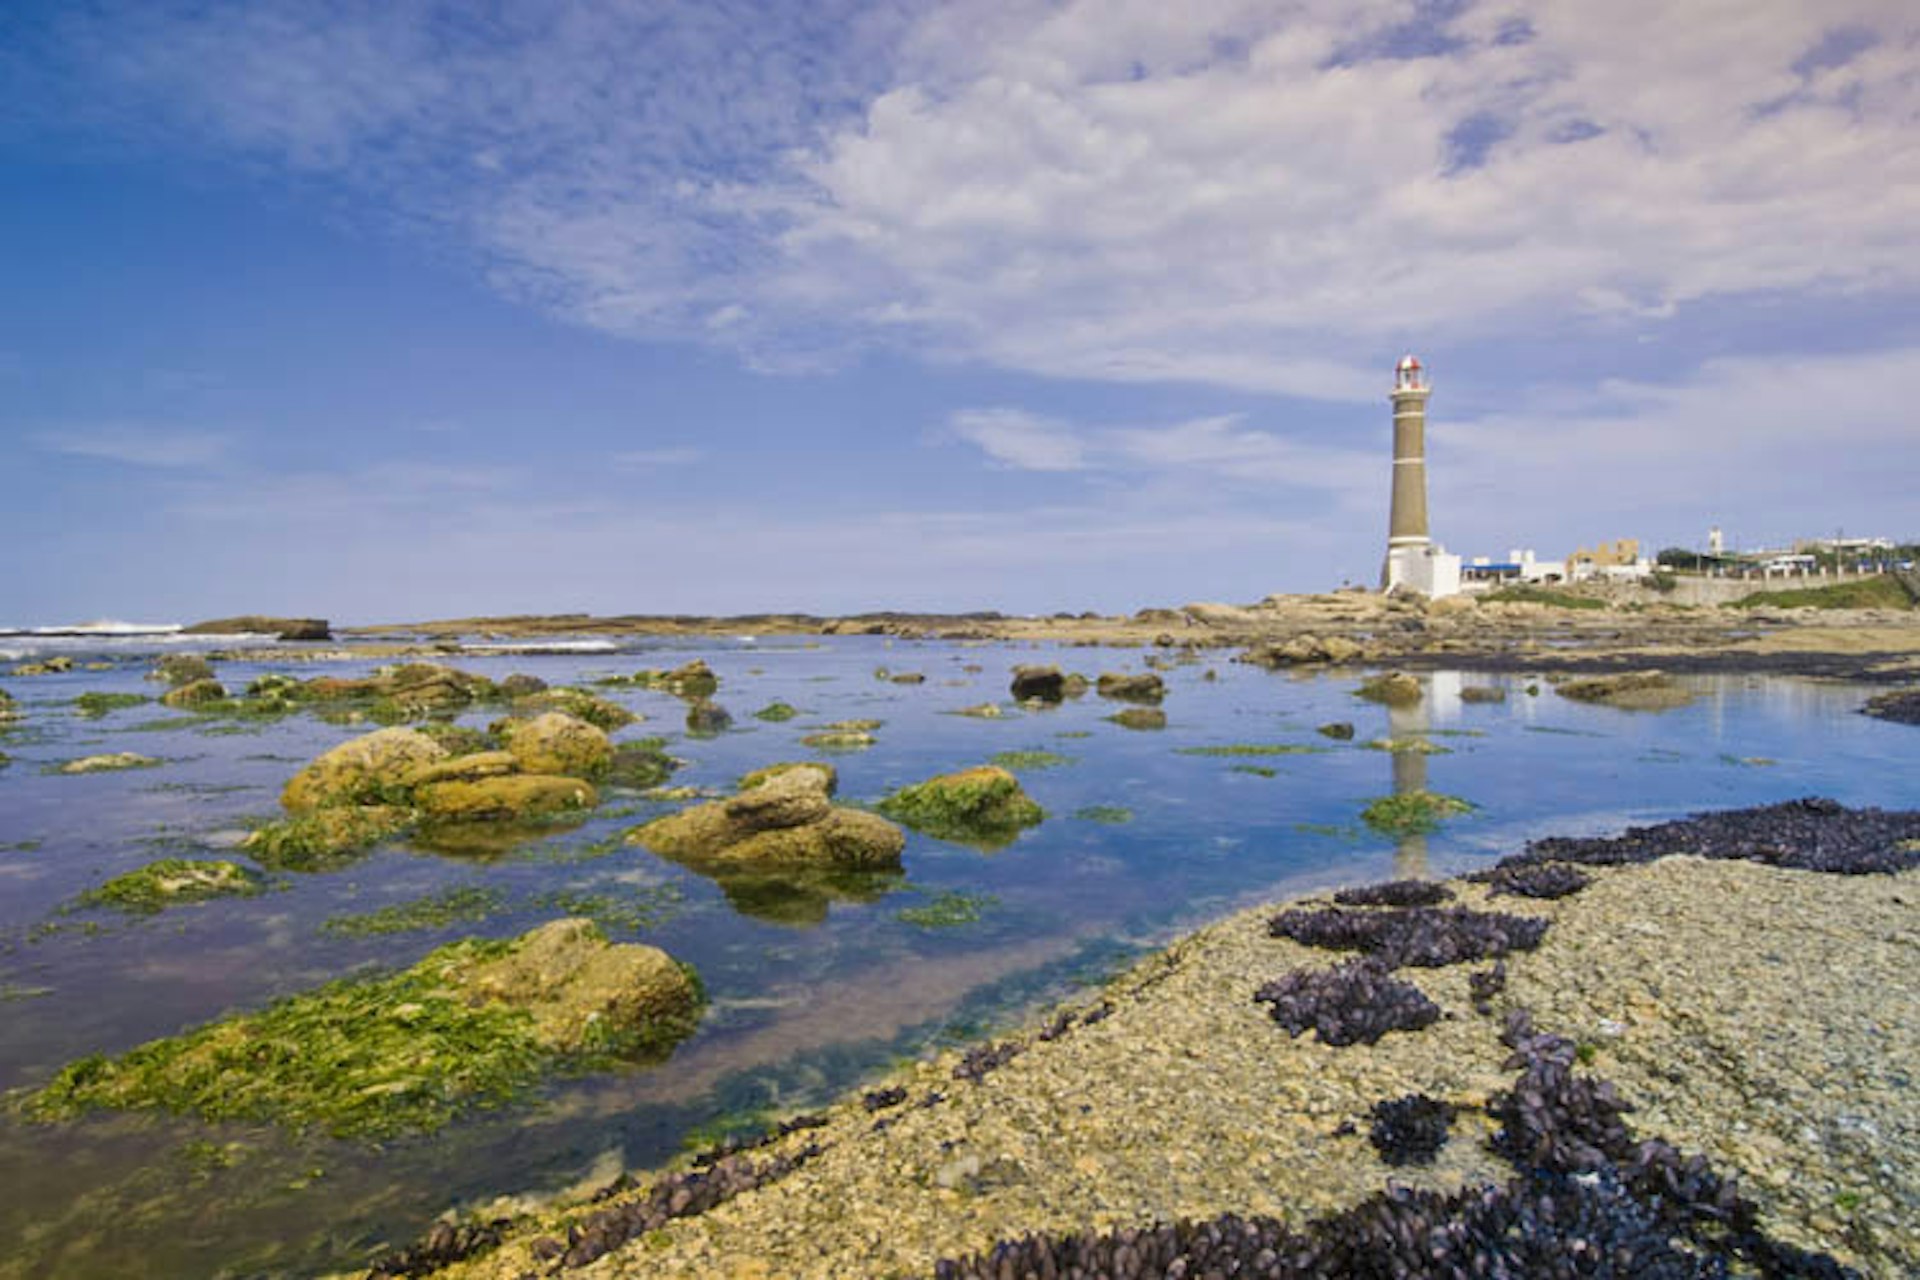 Algea-covered rocks emerge from the surface of glassy blue-green water, and a distant lighthouse juts out over the sea in Cabo Polonio, Uruguay